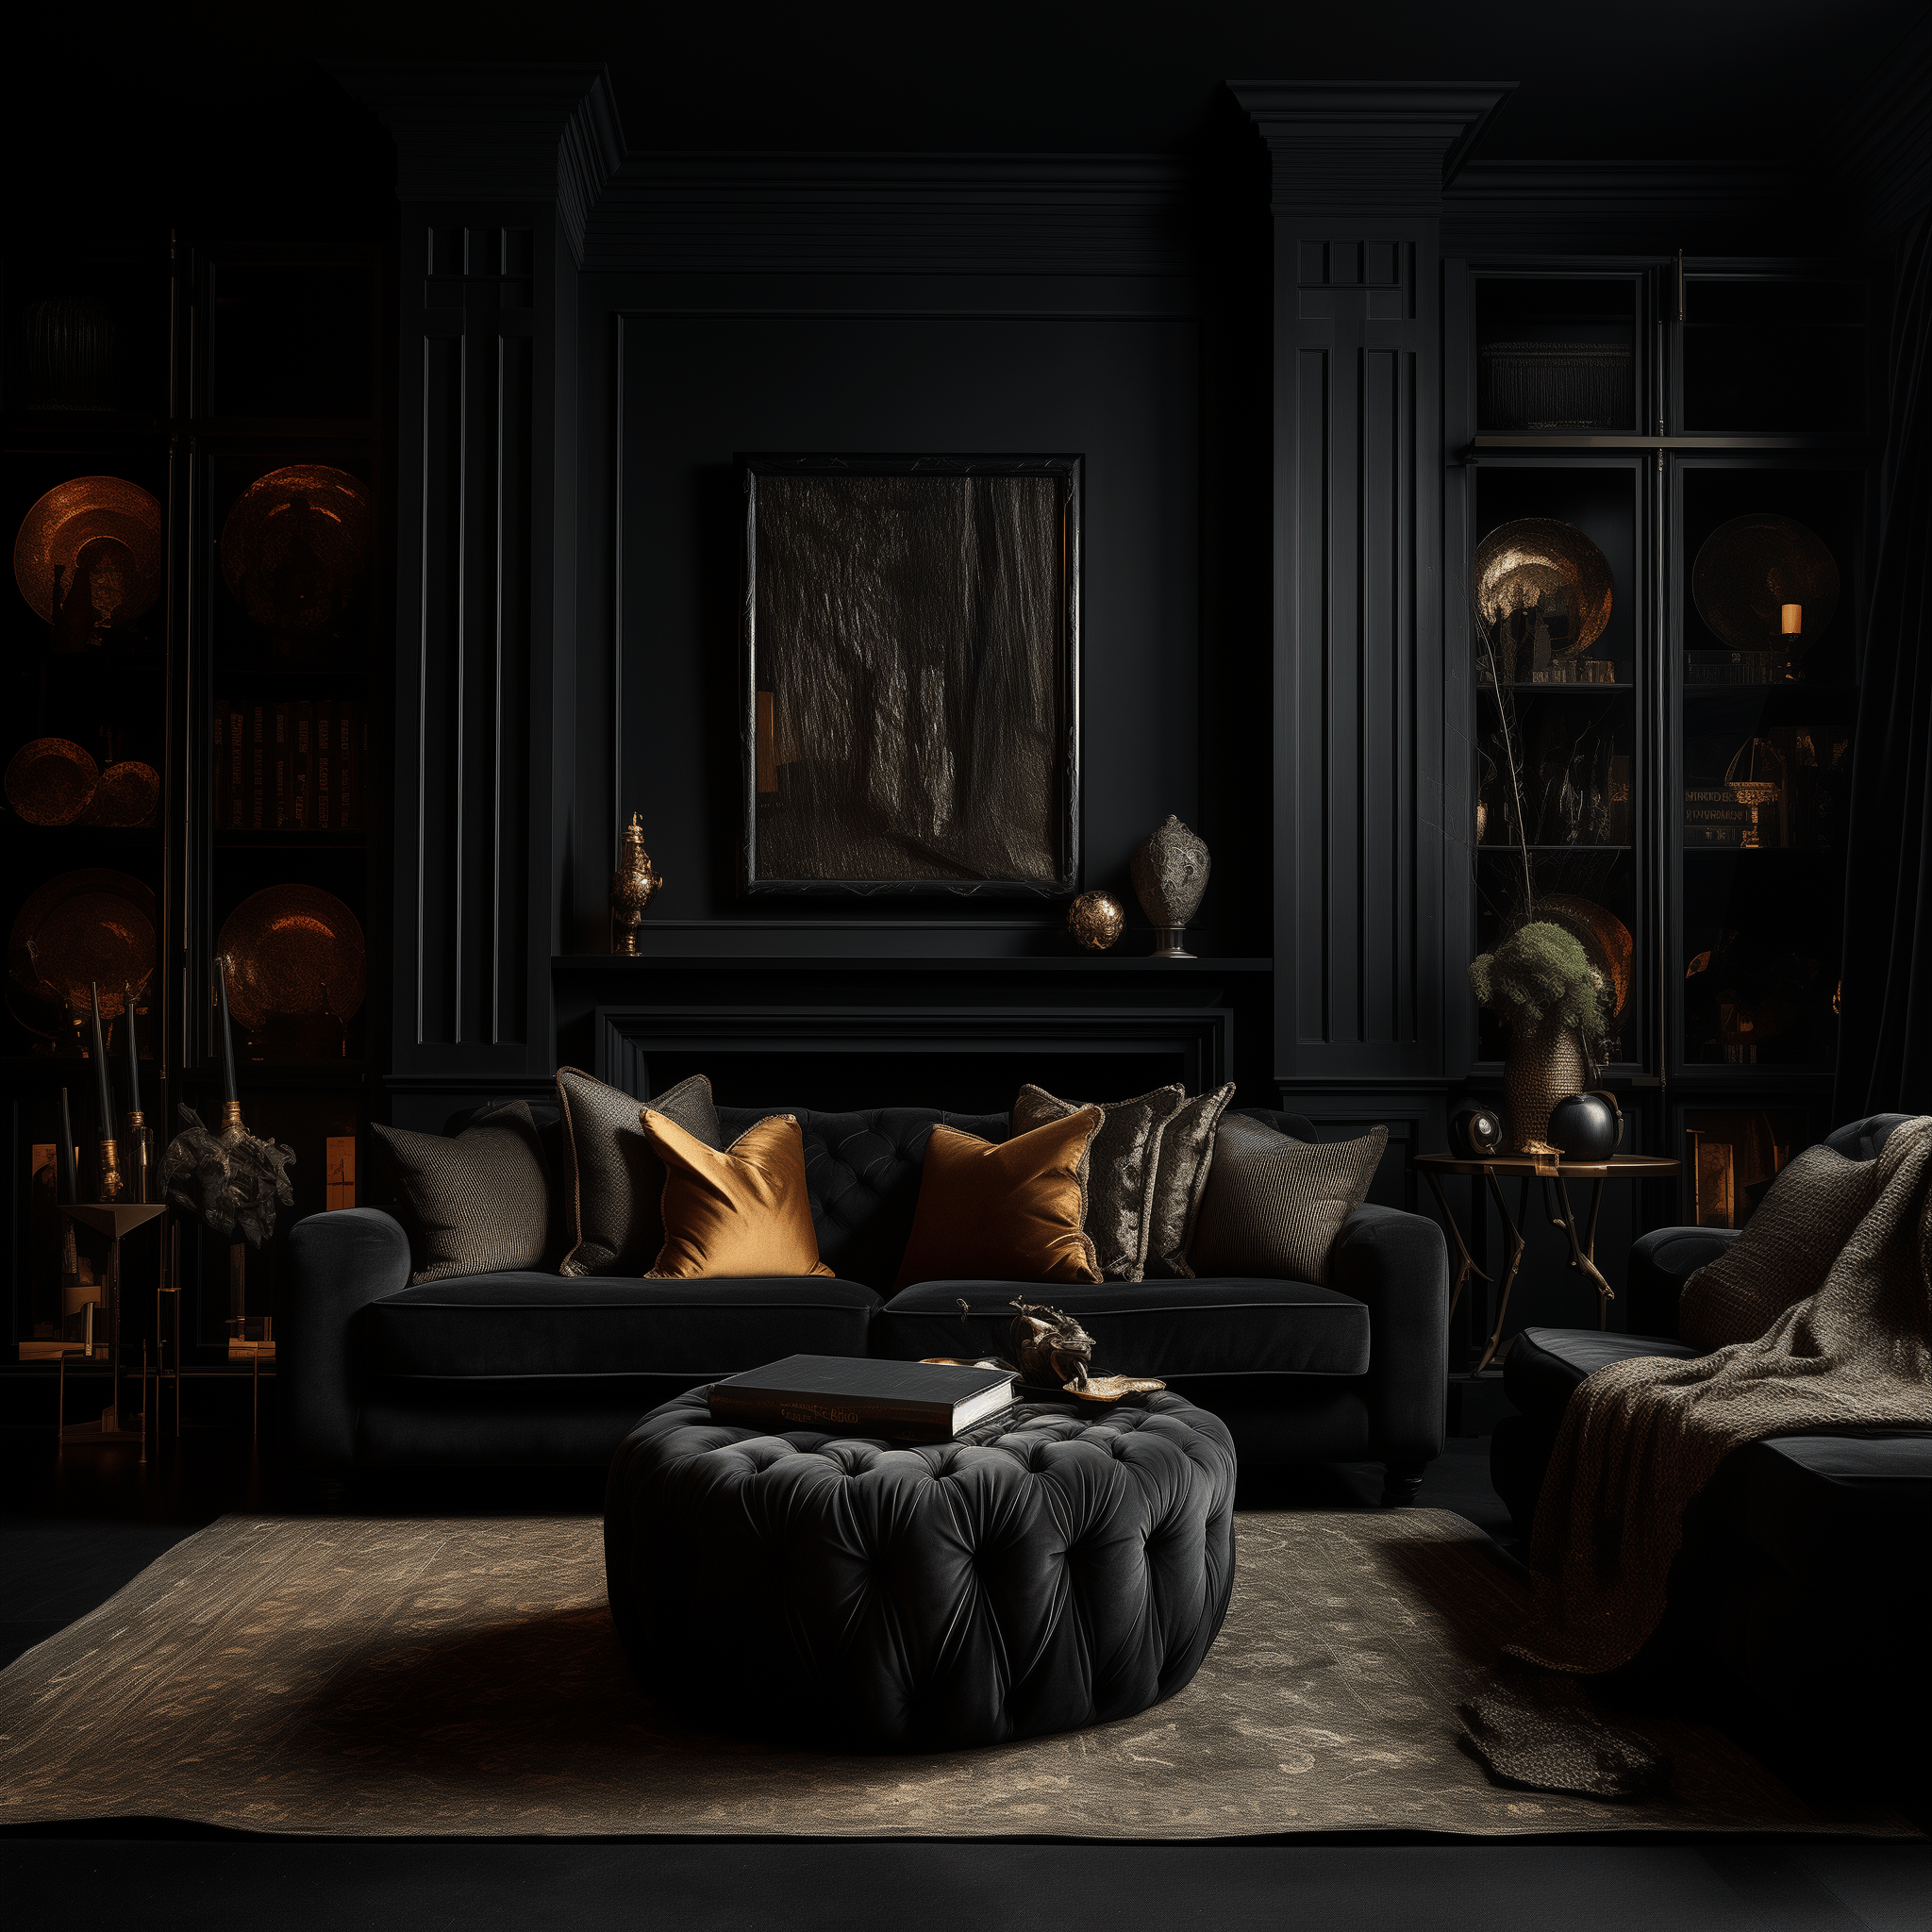 Homely and inviting dark living room, captured at eye-level, featuring comfortable seating and warm lighting for a cozy ambiance.